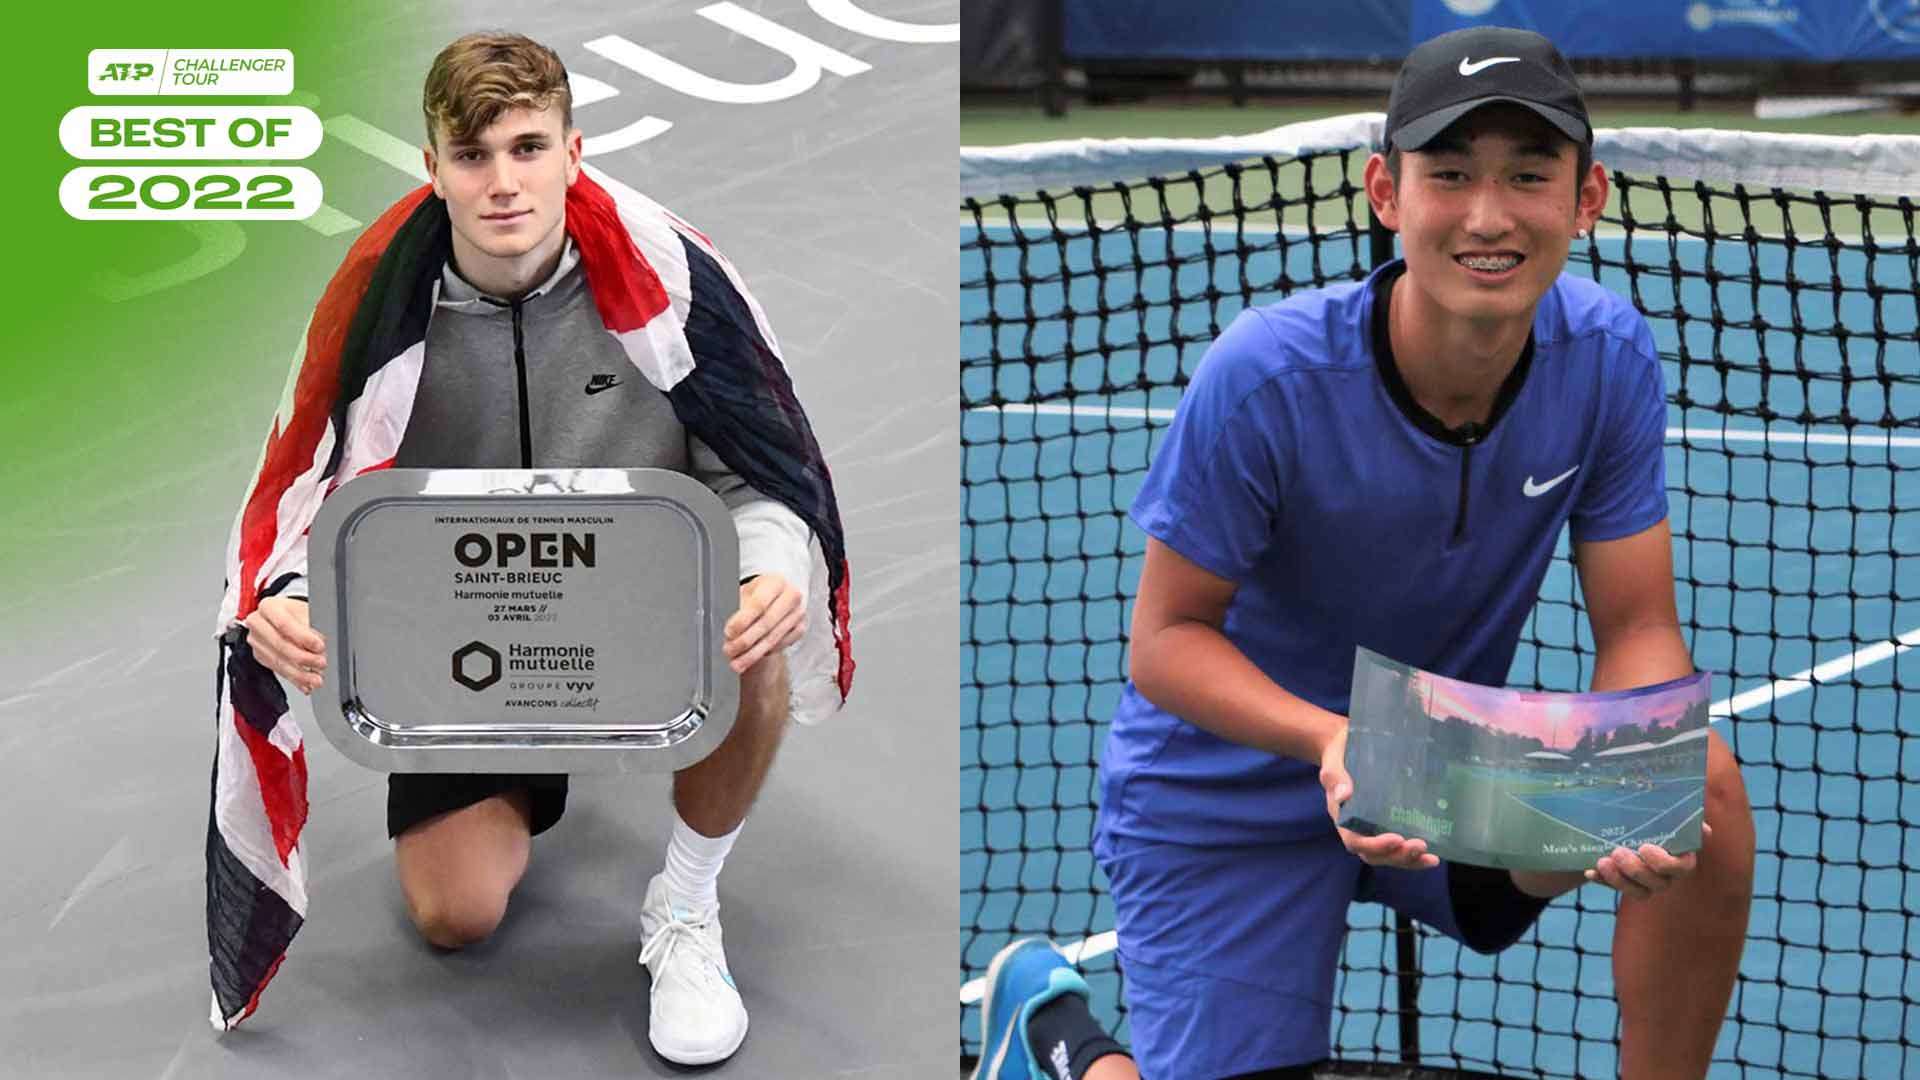 Five Challenger Player Storylines From 2022 ATP Tour Tennis